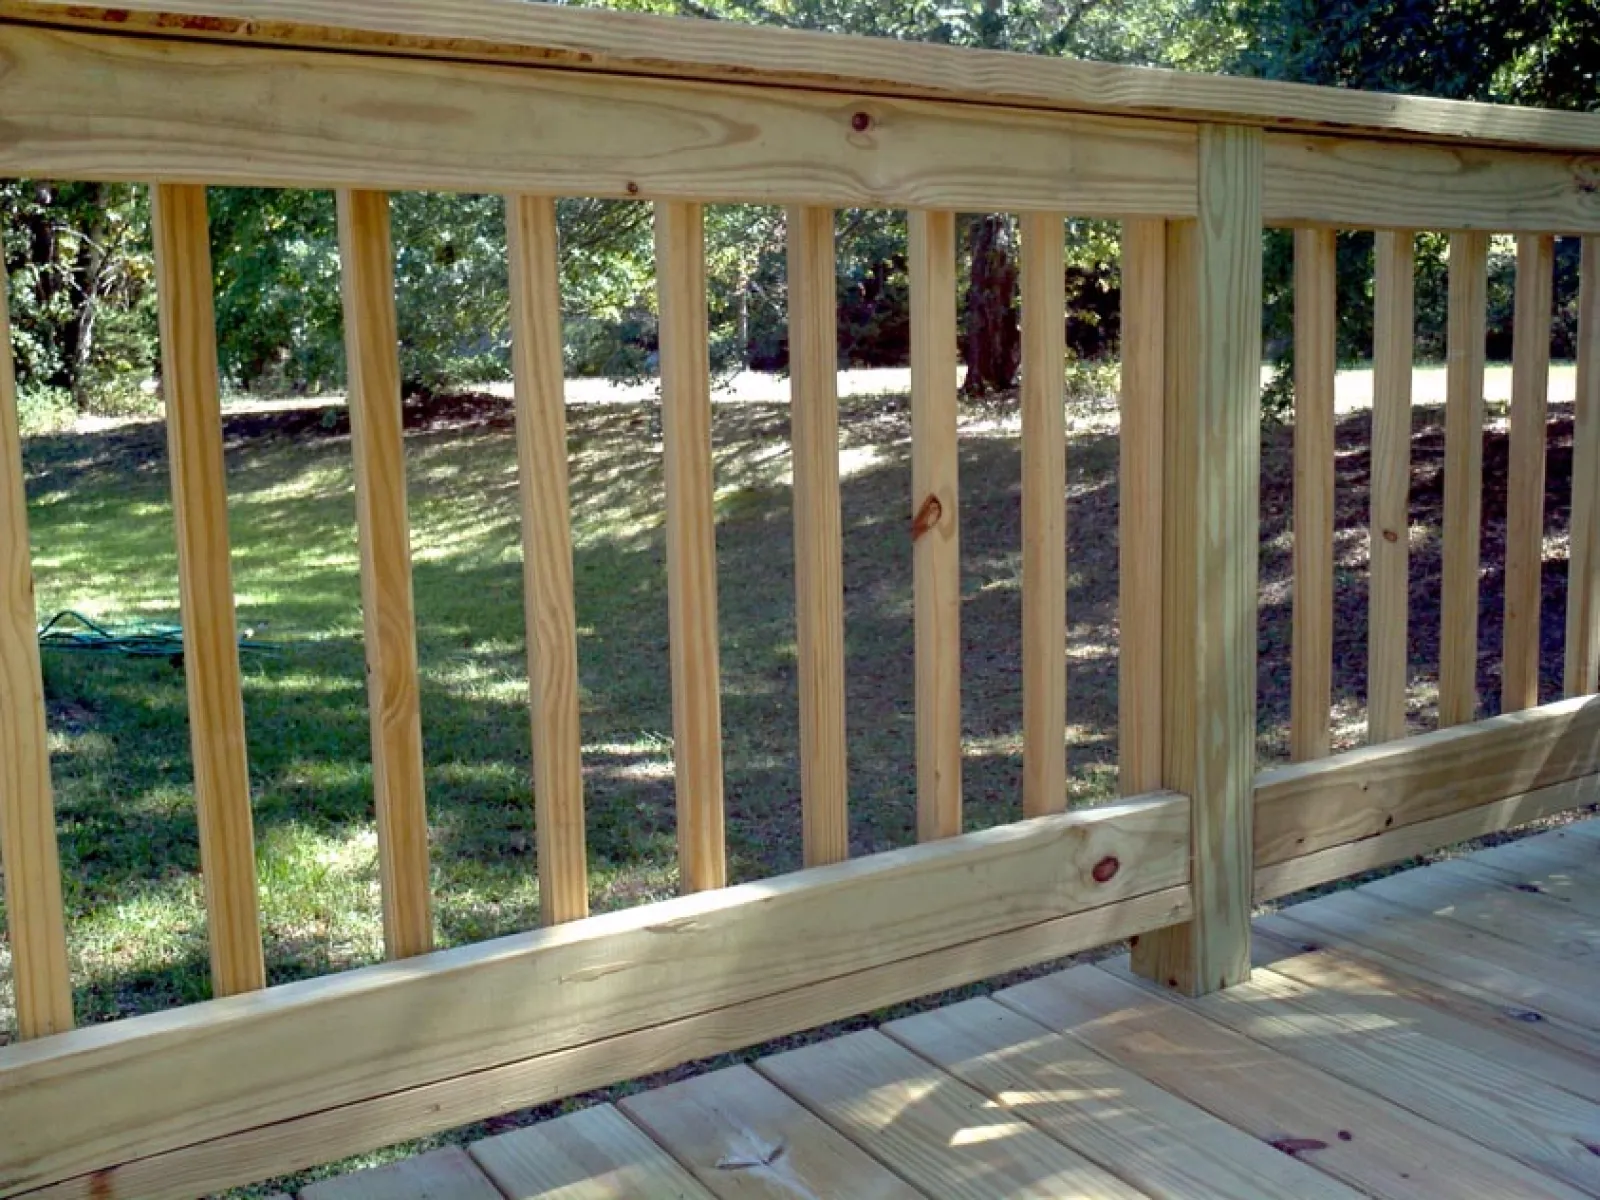 a wooden deck with a railing